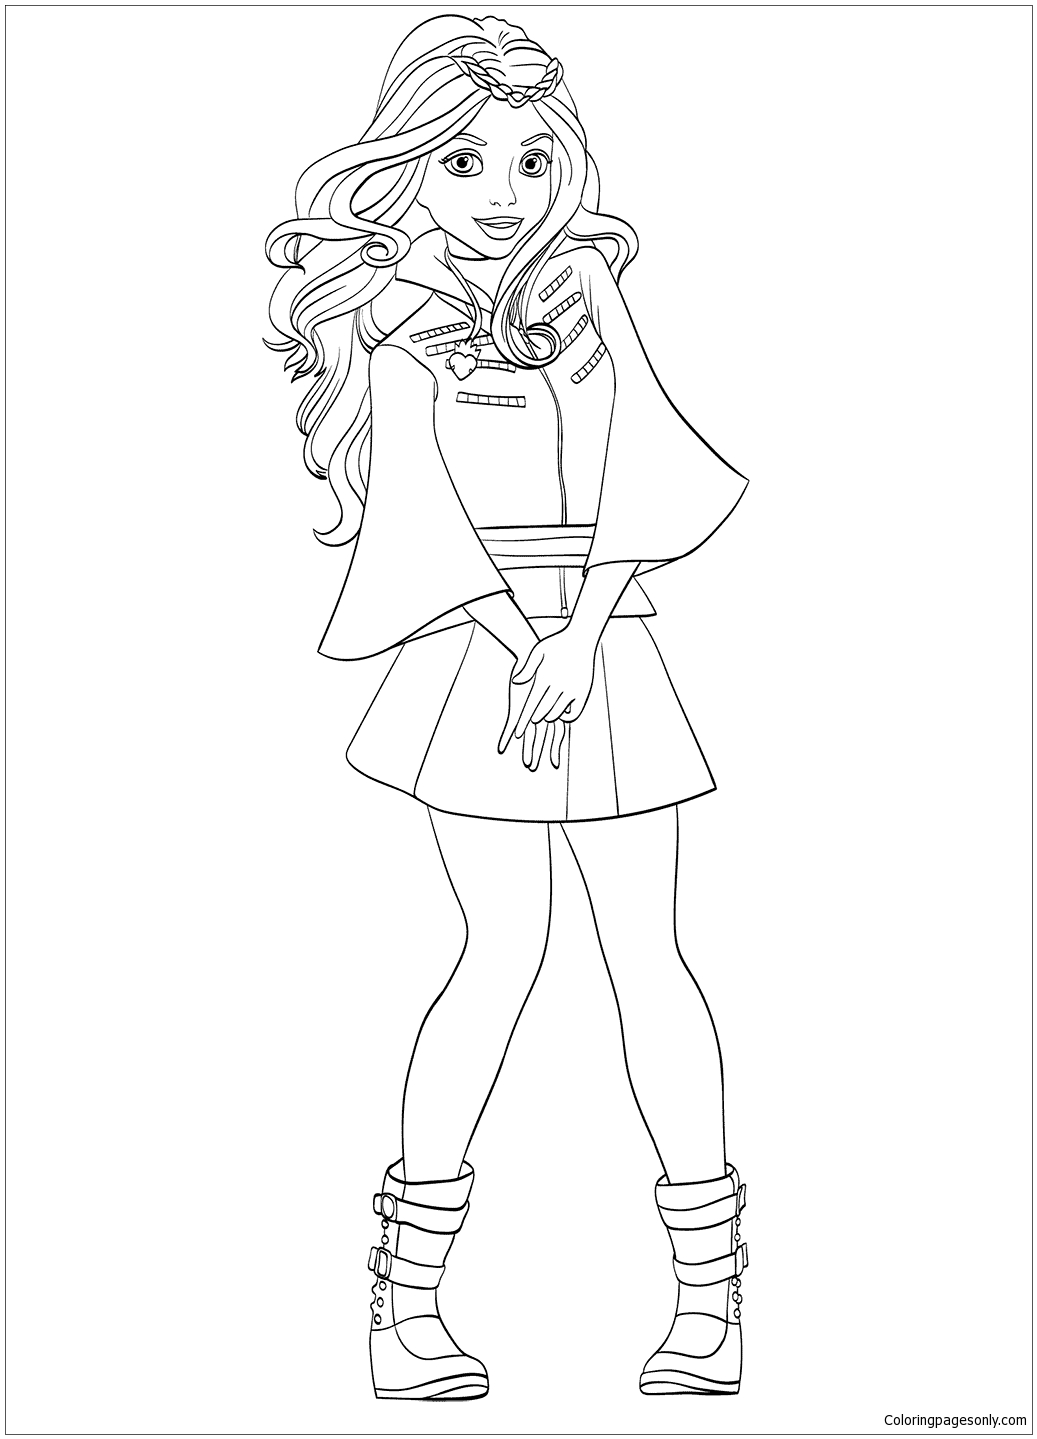 Evie from Descendants Coloring Page - Free Coloring Pages Online